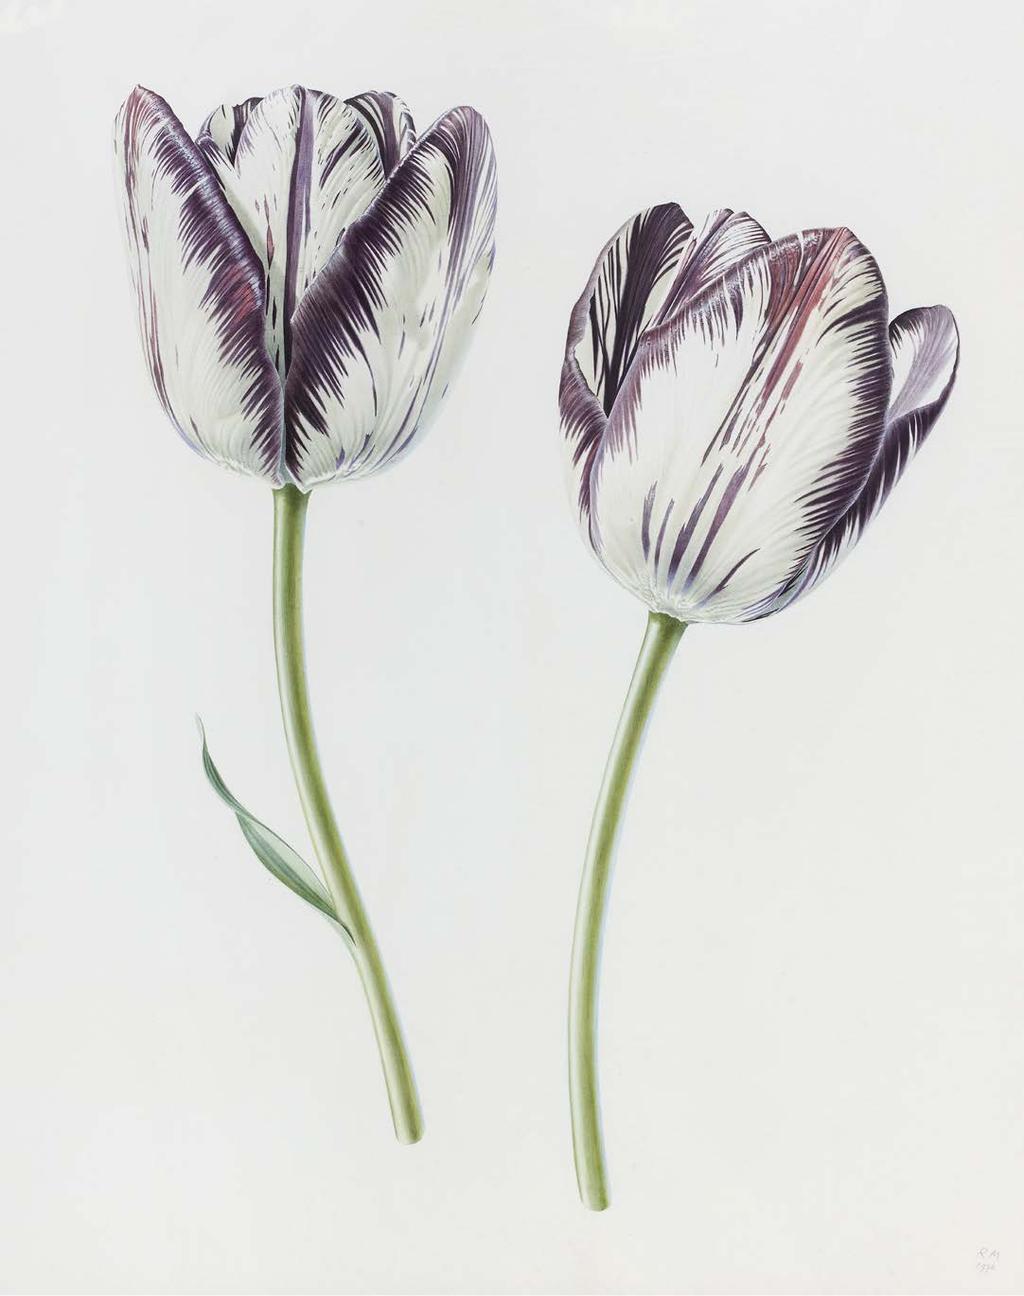 Provenance: Redfern Gallery Exh: Rory McEwen The Botanical Paintings, 1988-9